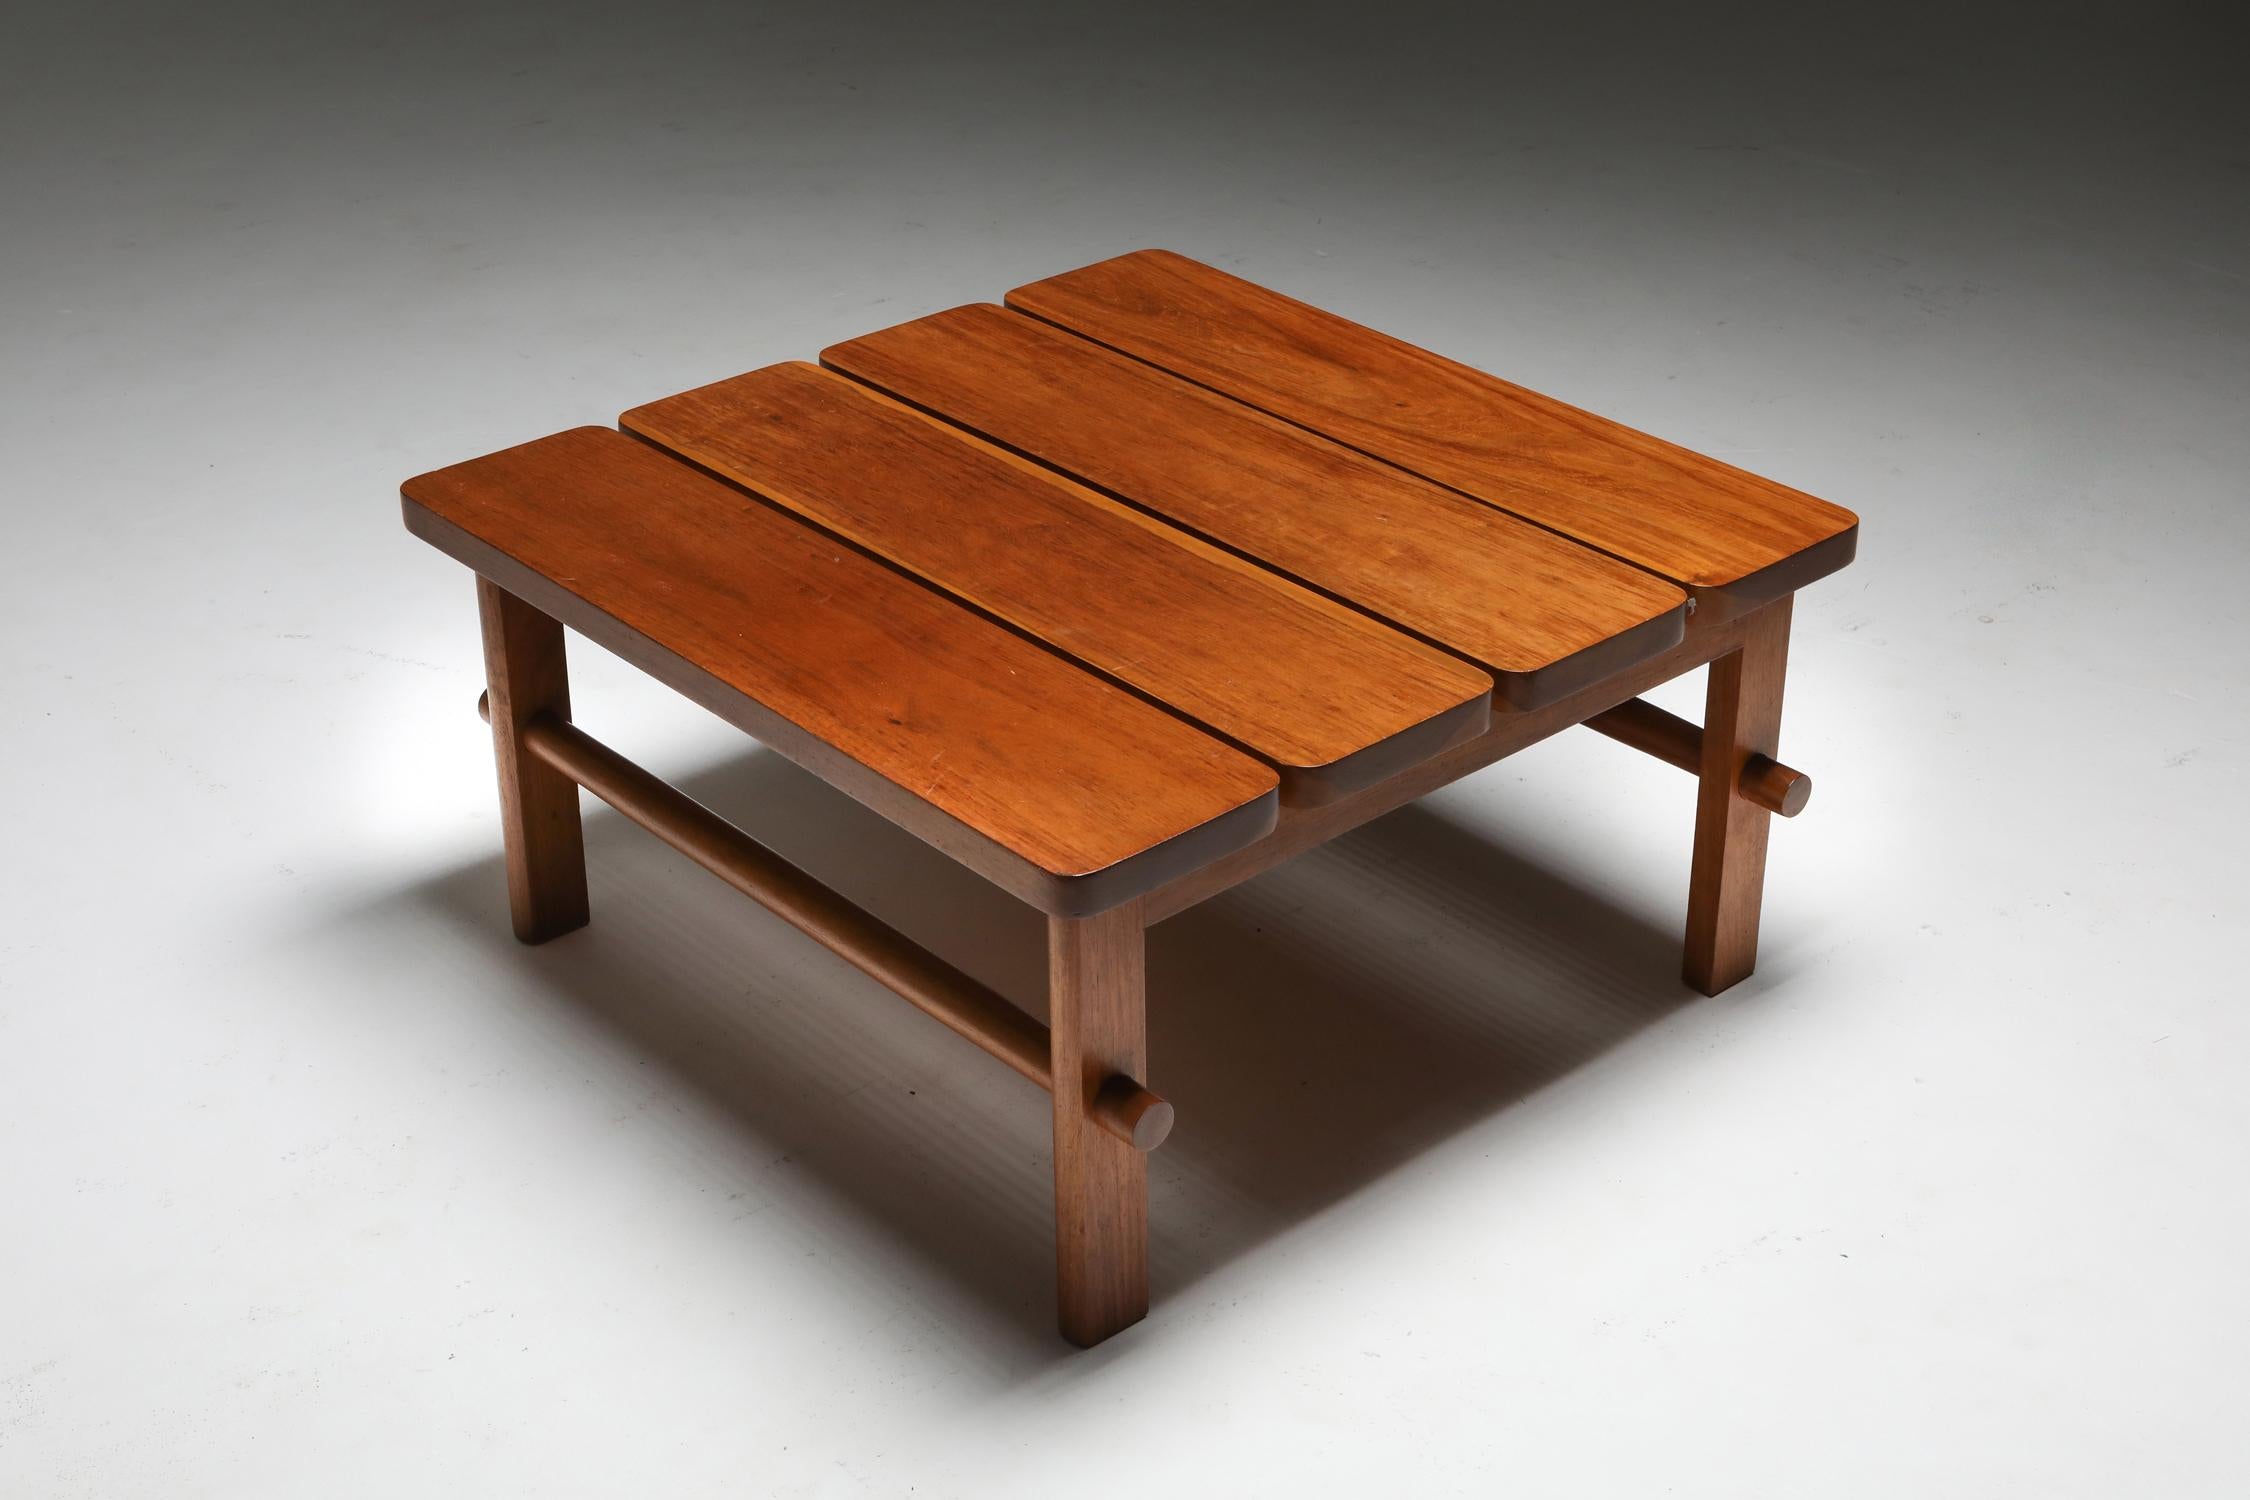 Hardwood Mid-Century Modern coffee table, Brazil, the 1960s

Simple and elegant design
Form and function
All characteristics of this piece refer to great design
Think Joaquim Tenreiro, Sergio Rodrigues and others.

